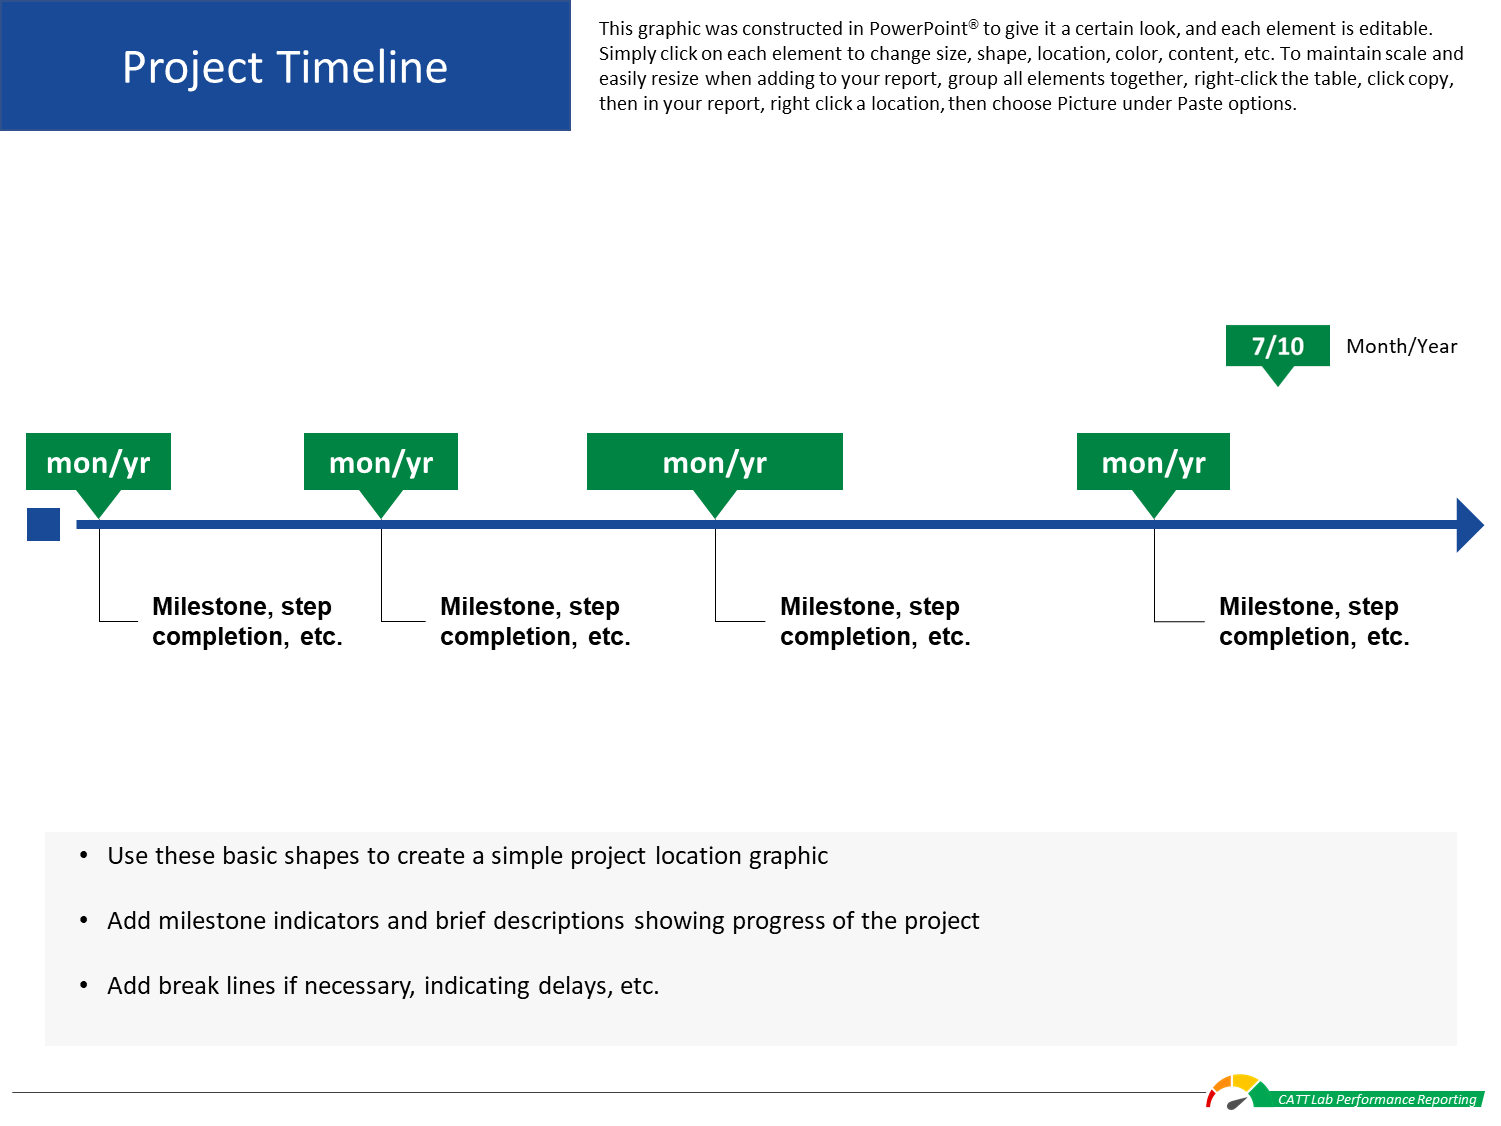 A template for a simplified project timeline. At the top, there is a large header reading "Project Timeline" next to a paragraph of text describing the timeline. Below the header, there is a linear timeline with a handful of key points. At the bottom, there is a short bulleted list with additional information.